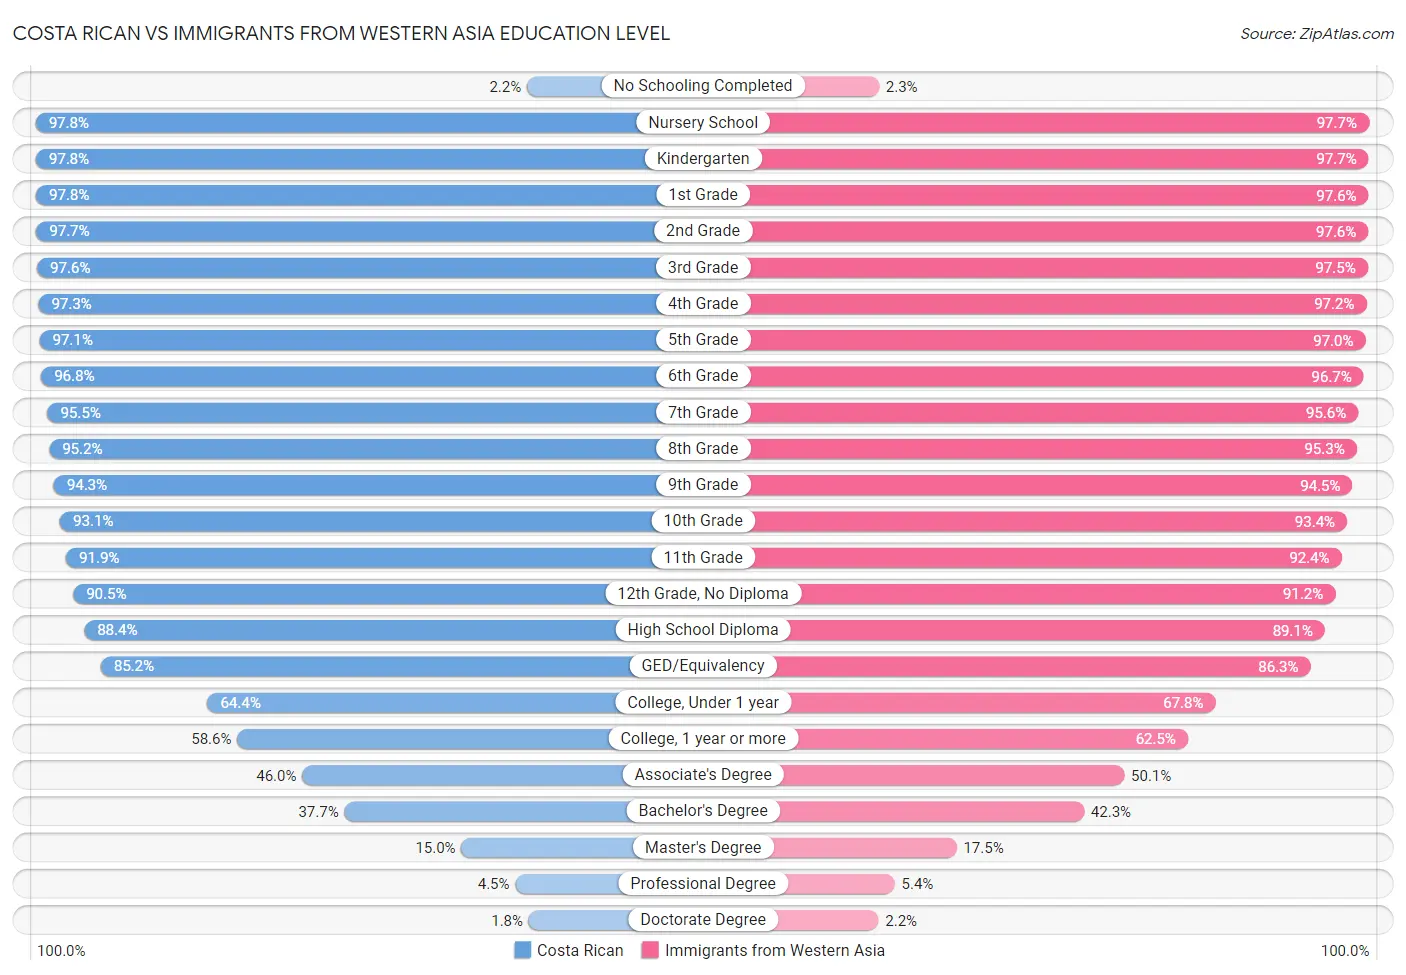 Costa Rican vs Immigrants from Western Asia Education Level